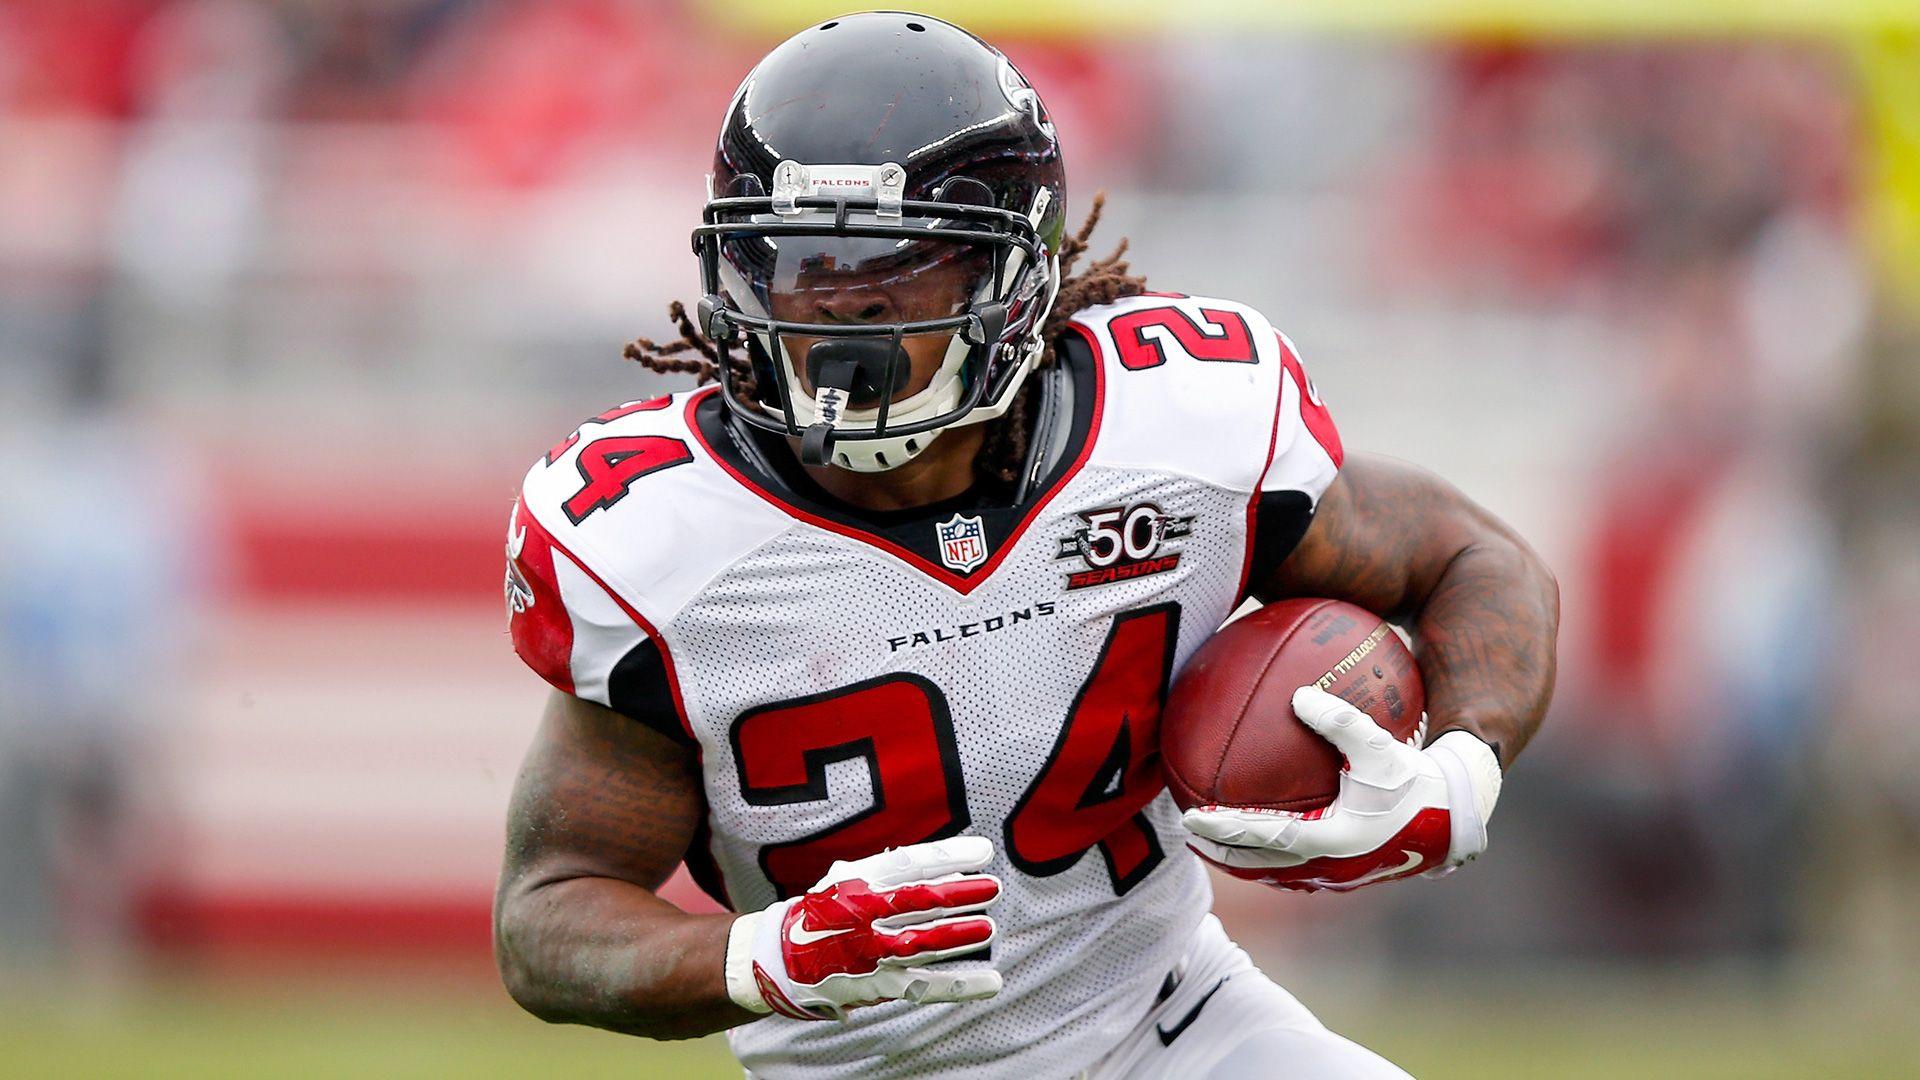 Youngsters rush to top of NFL running back rankings